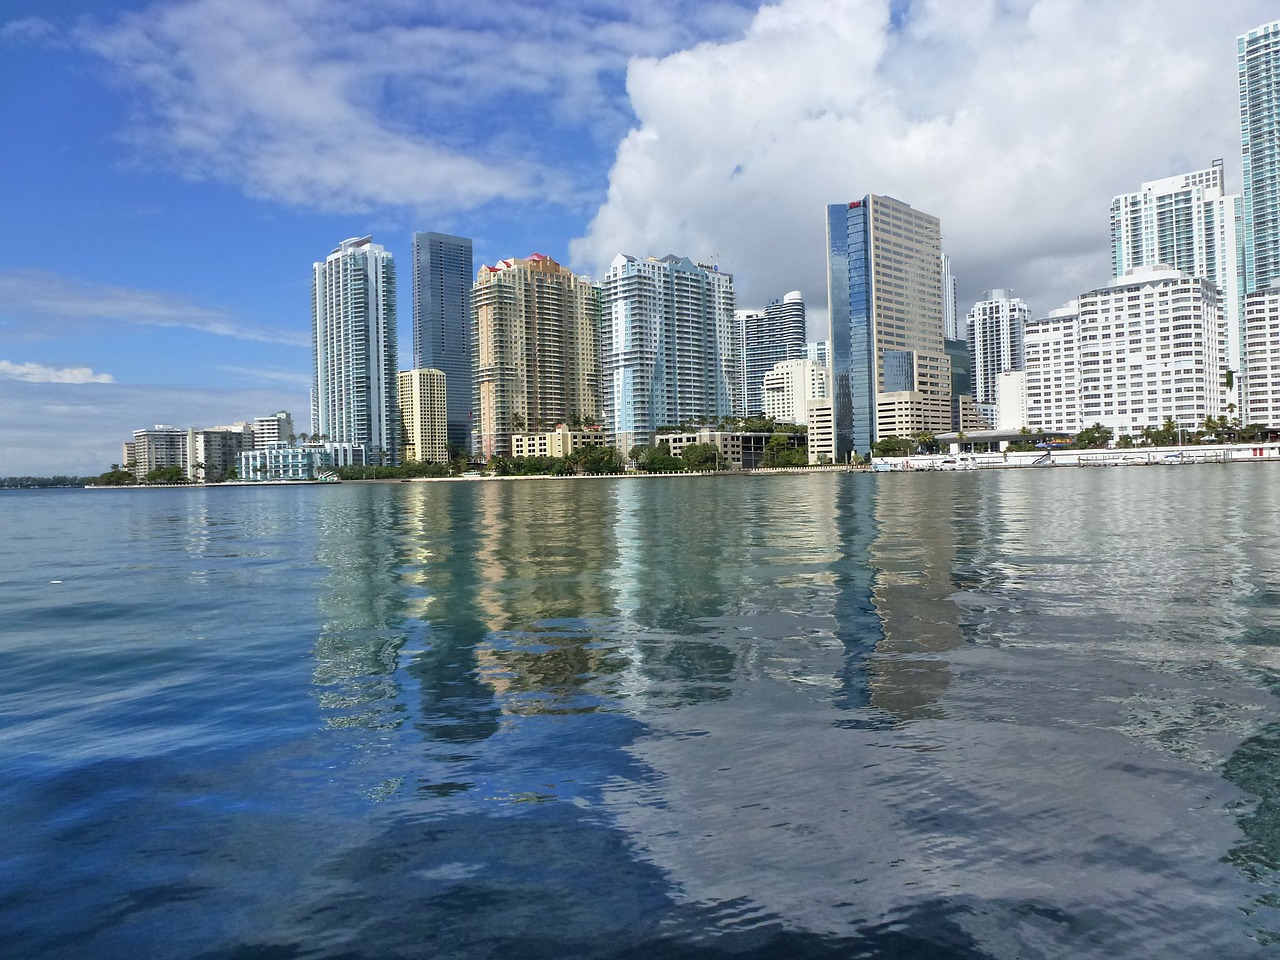 Miami at Risk Without Coastal Flood Insurance